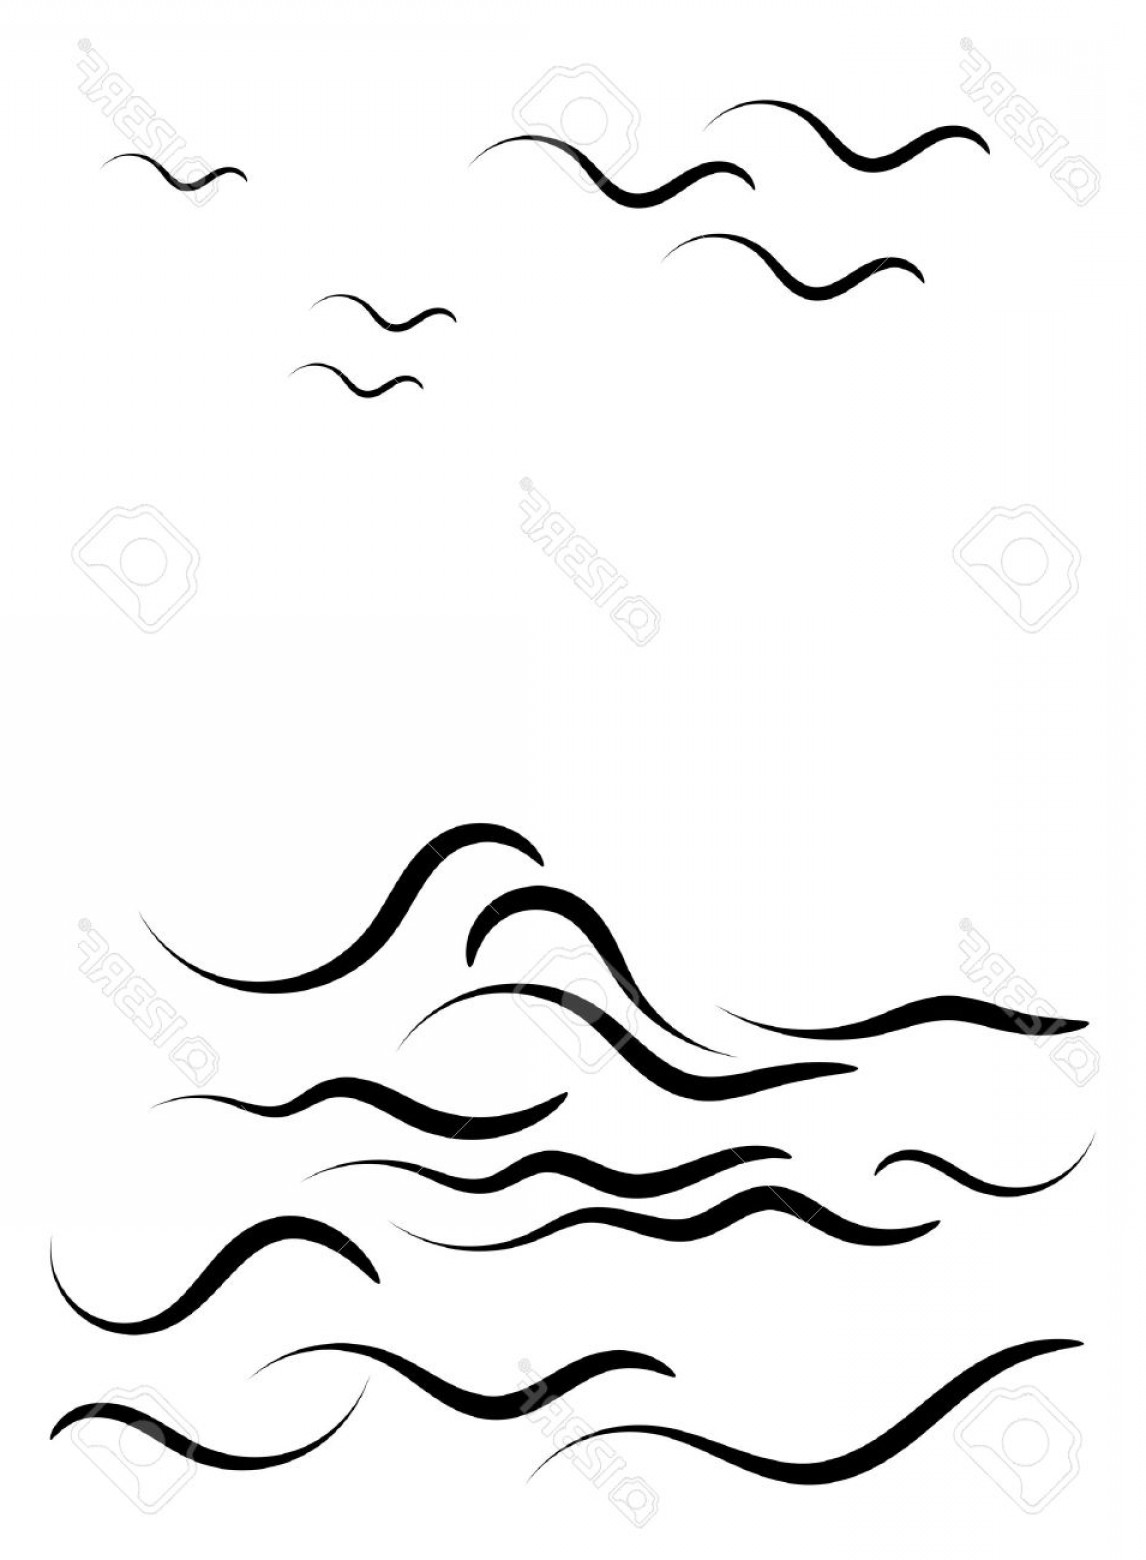 ocean clipart black and white